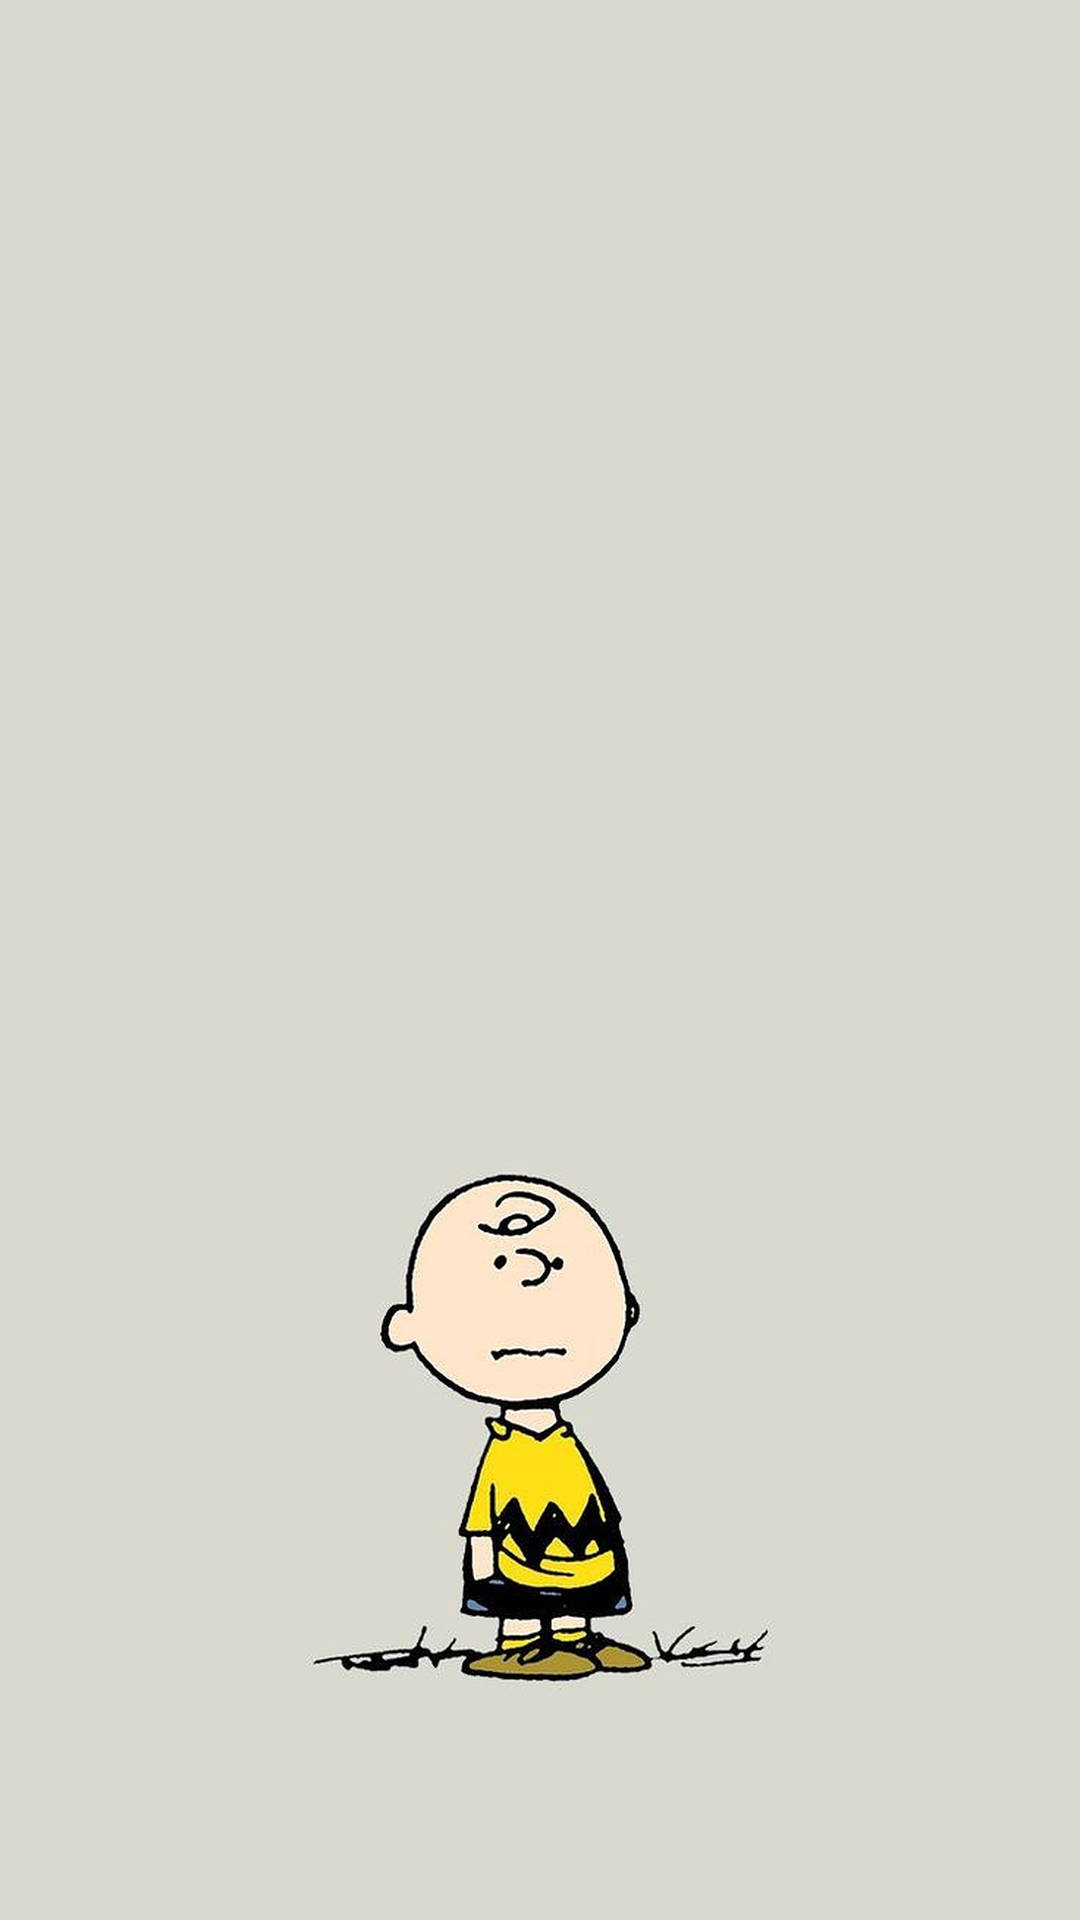 Lonely Charlie Brown